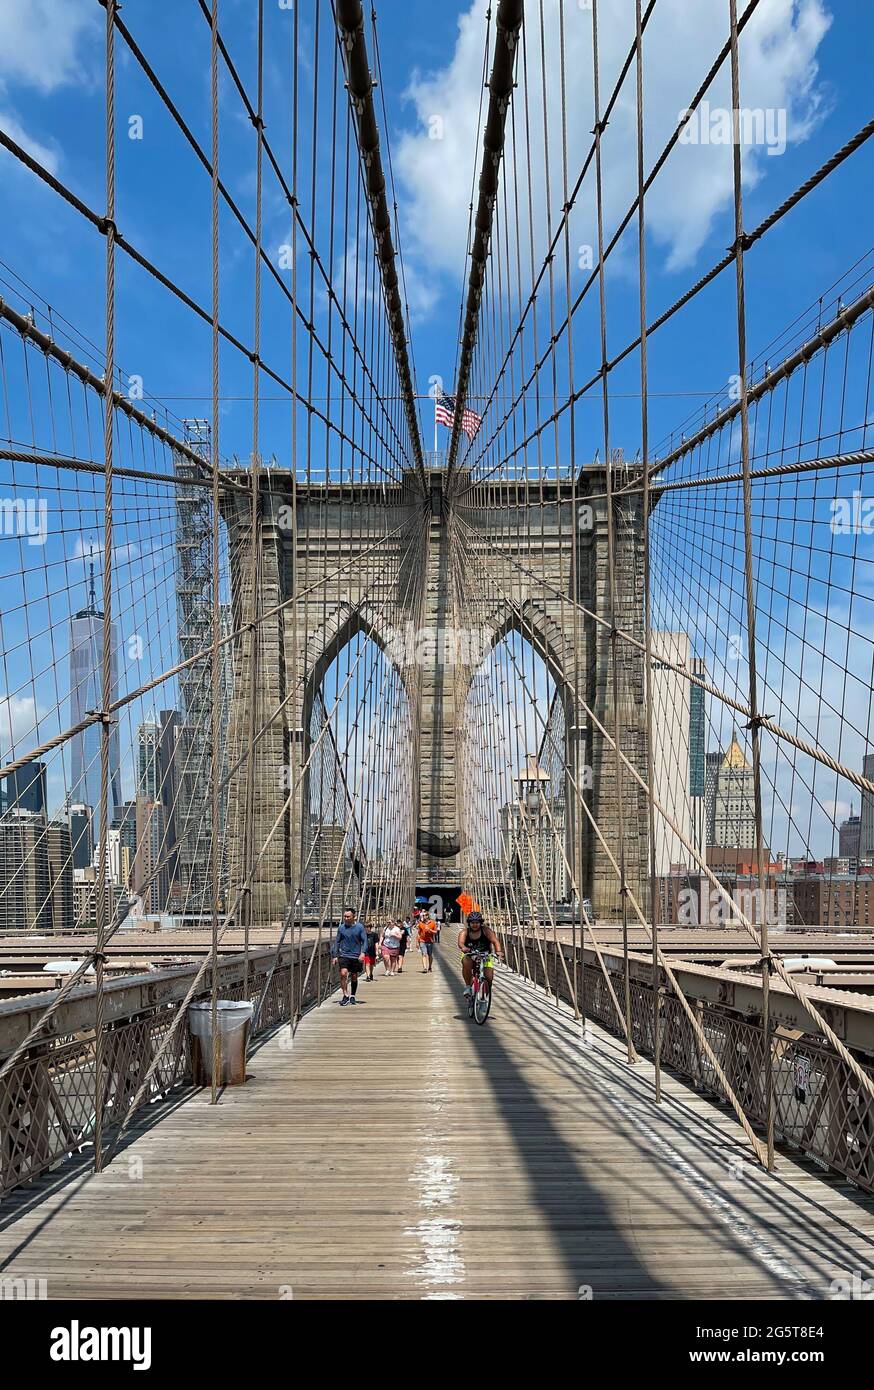 The walkway across the Brooklyn Bridge in New York city has separate lanes for pedestrian walkers and bicyclists. Stock Photo